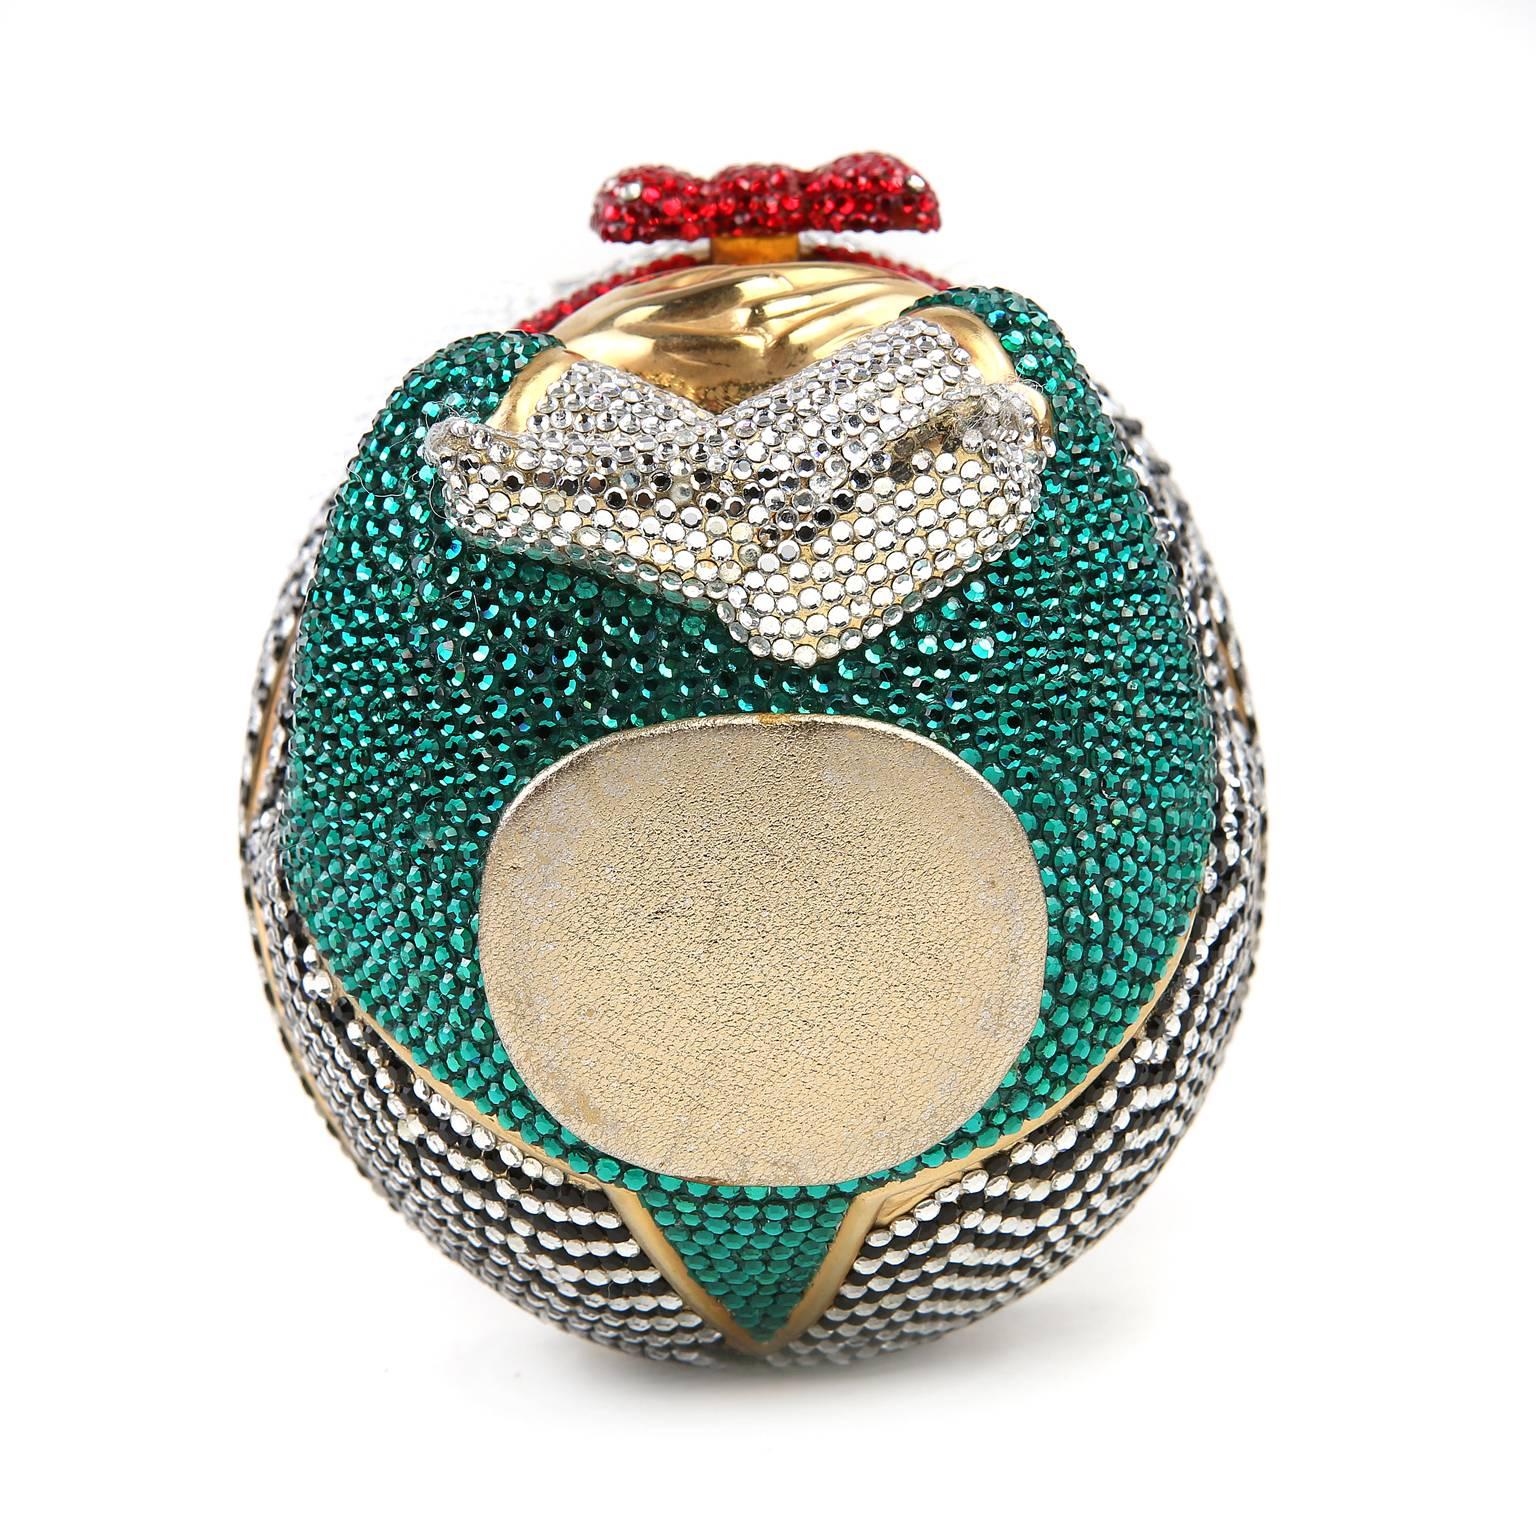 Judith Leiber Humpty Dumpty Minaudiere Evening Bag In Excellent Condition For Sale In Malibu, CA